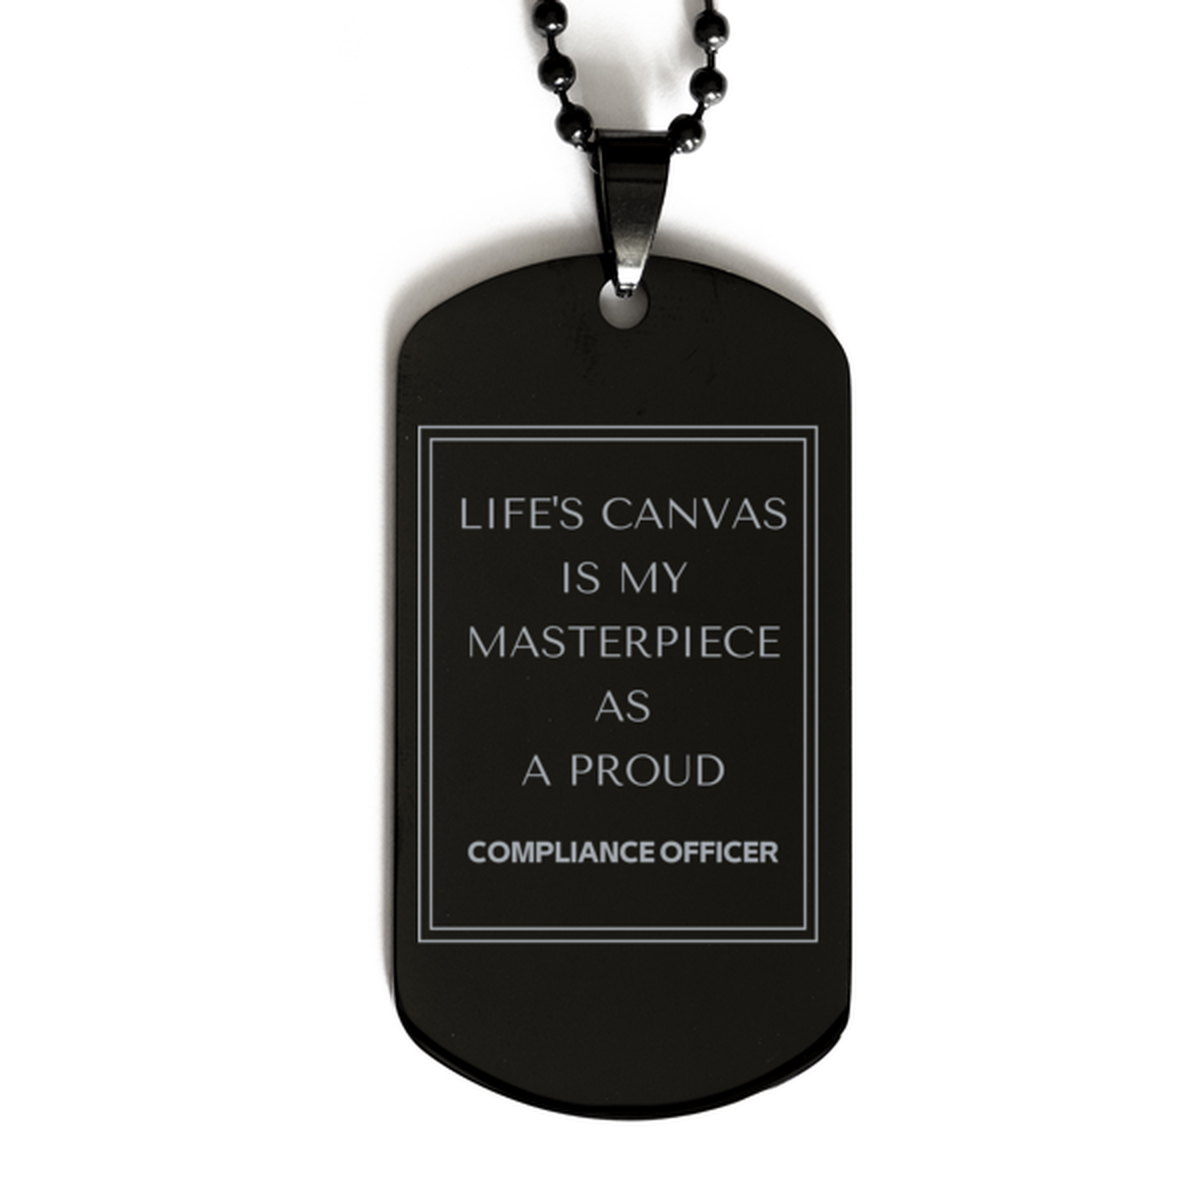 Proud Compliance Officer Gifts, Life's canvas is my masterpiece, Epic Birthday Christmas Unique Black Dog Tag For Compliance Officer, Coworkers, Men, Women, Friends